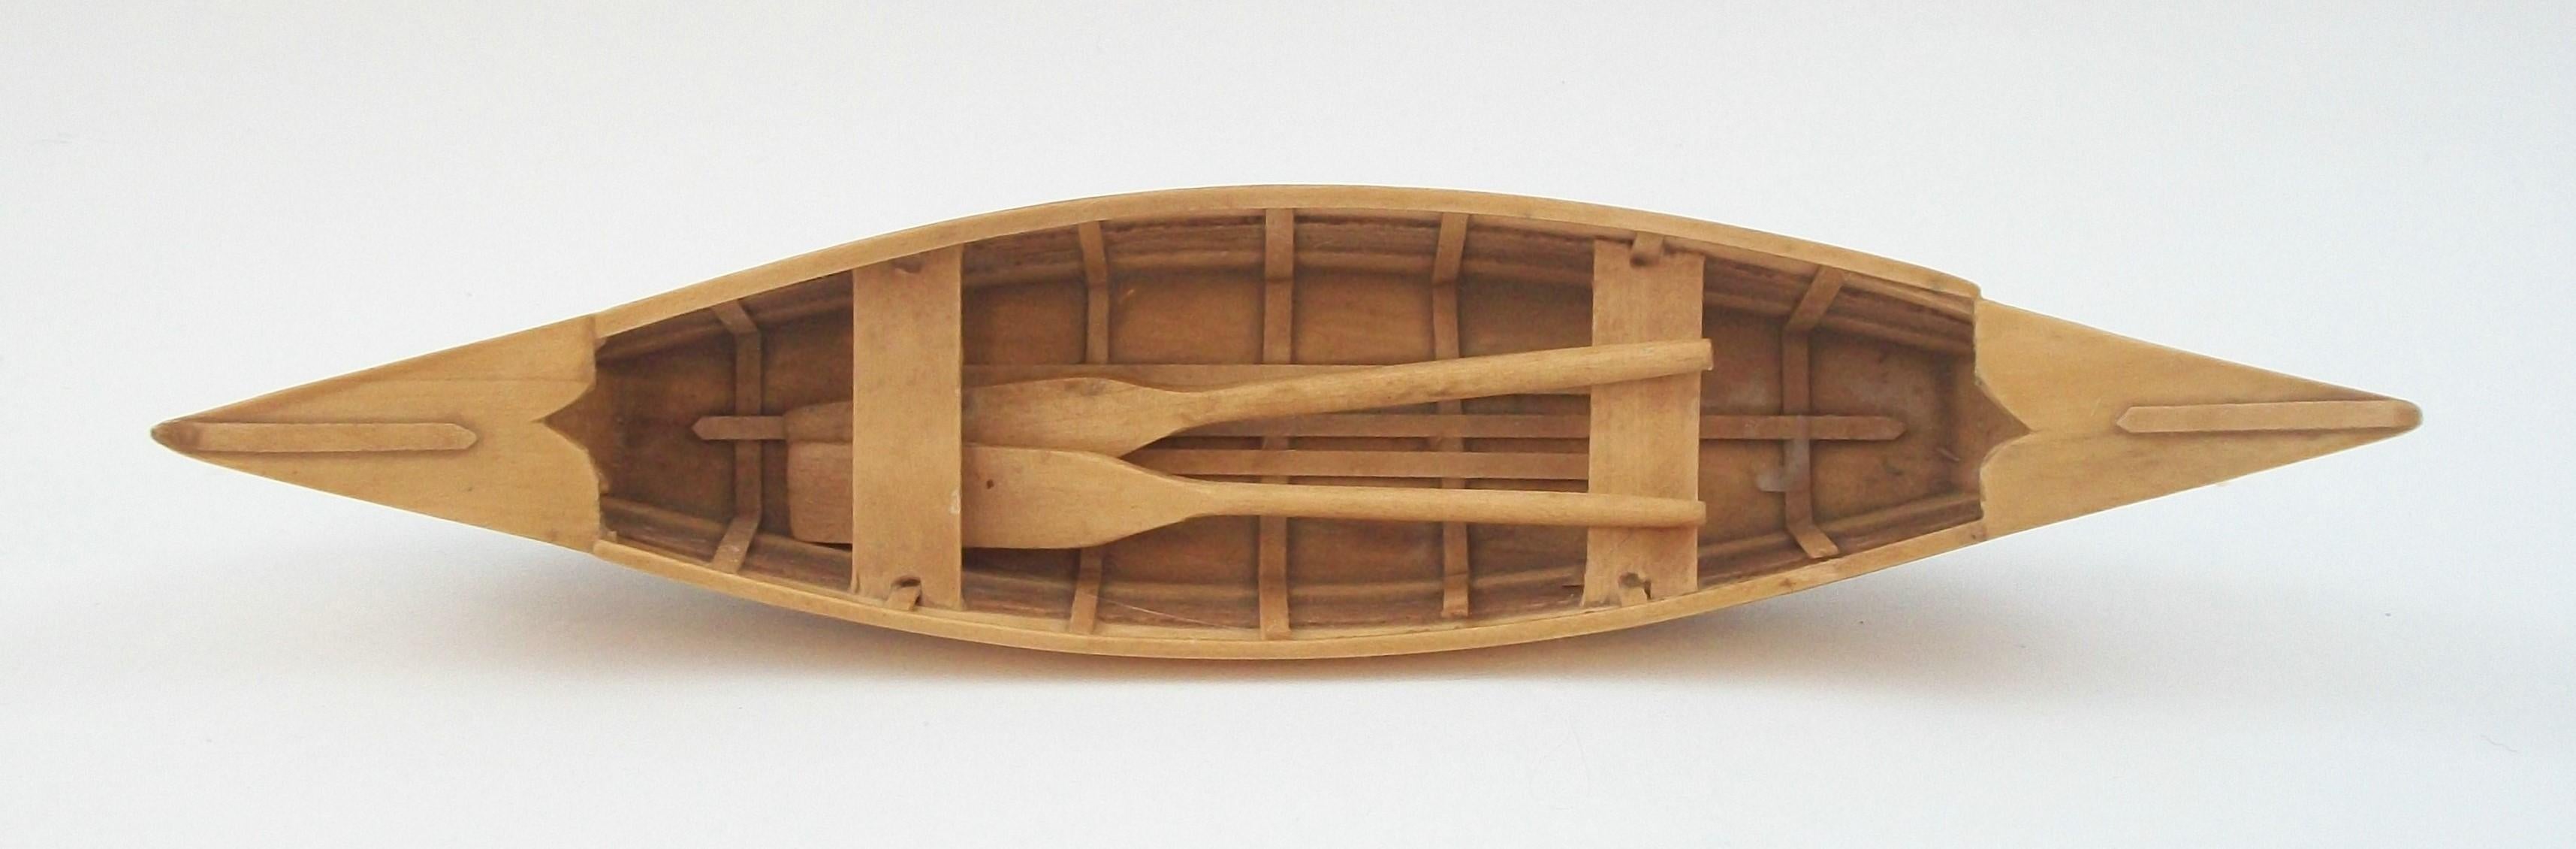 Vintage Pine & Cedar Canoe Scale Model - Canada - Mid 20th Century In Good Condition For Sale In Chatham, ON